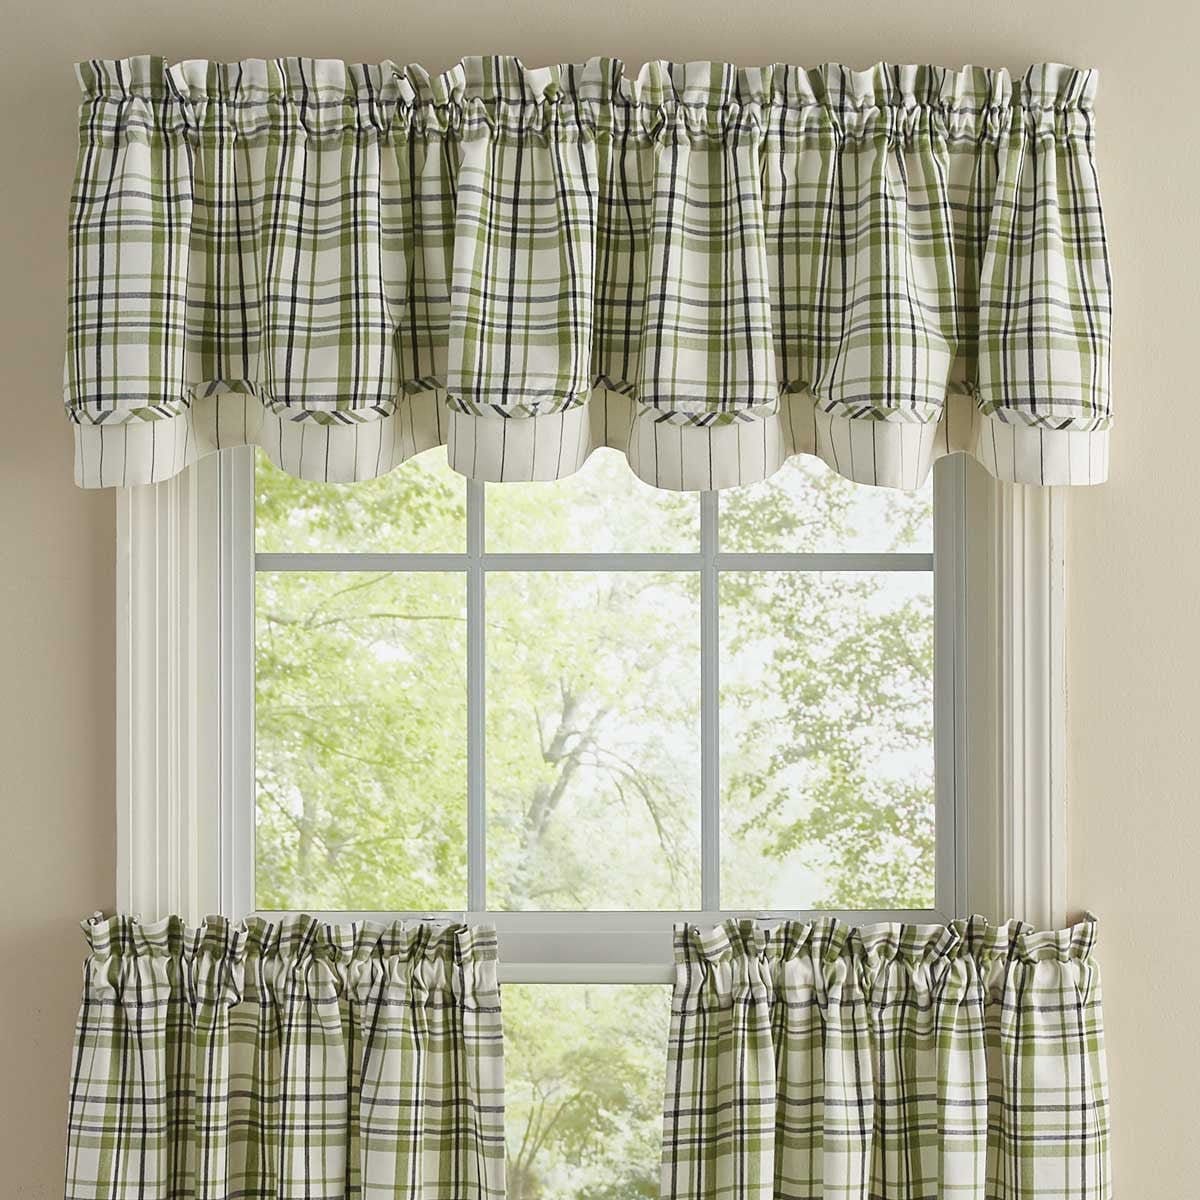 Time In A Garden Layered Valance Lined-Park Designs-The Village Merchant